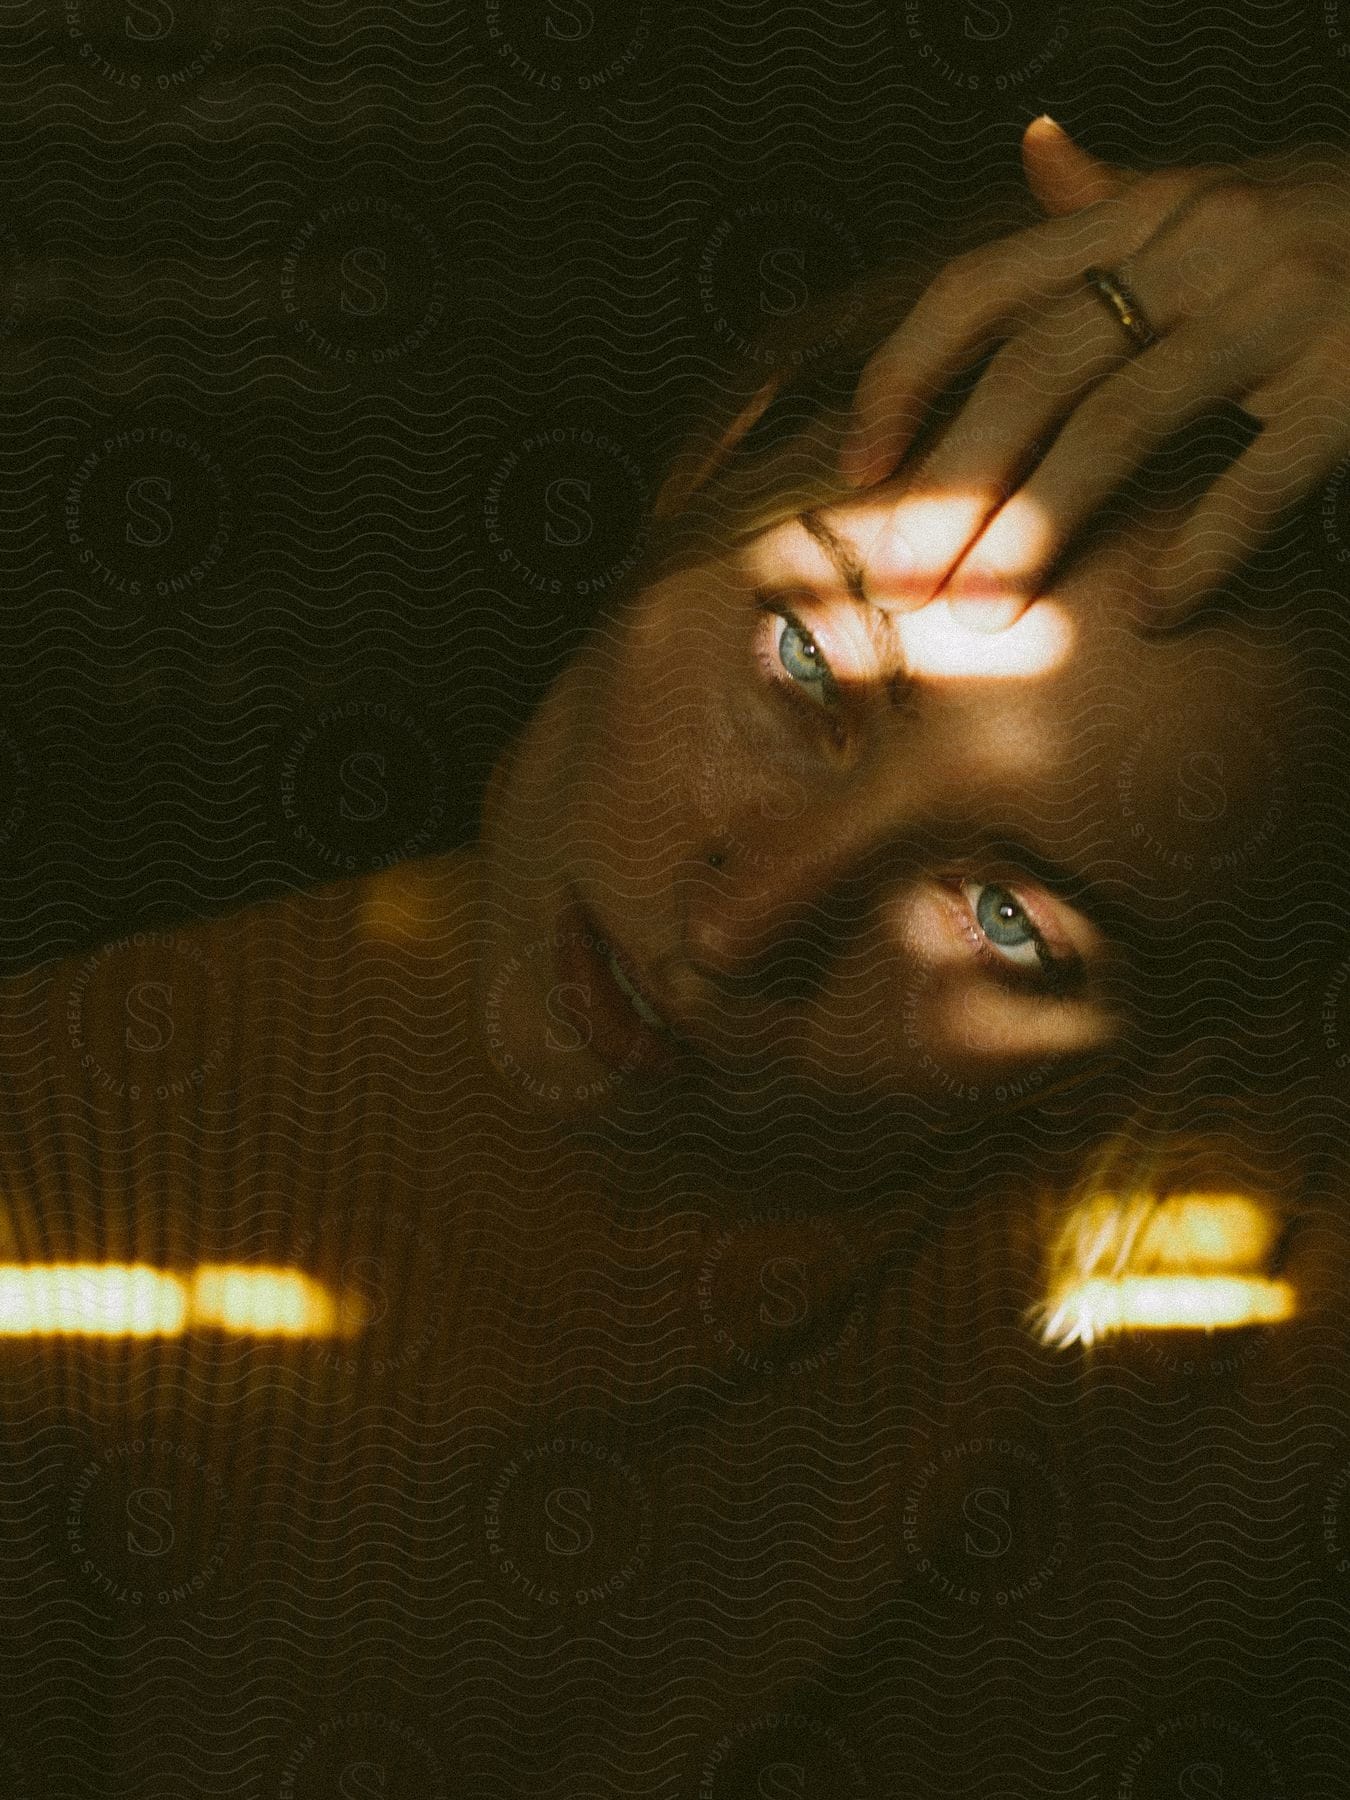 Close-up of a woman in a yellow sweater, hand on forehead, with sunlight casting shadows across her face.